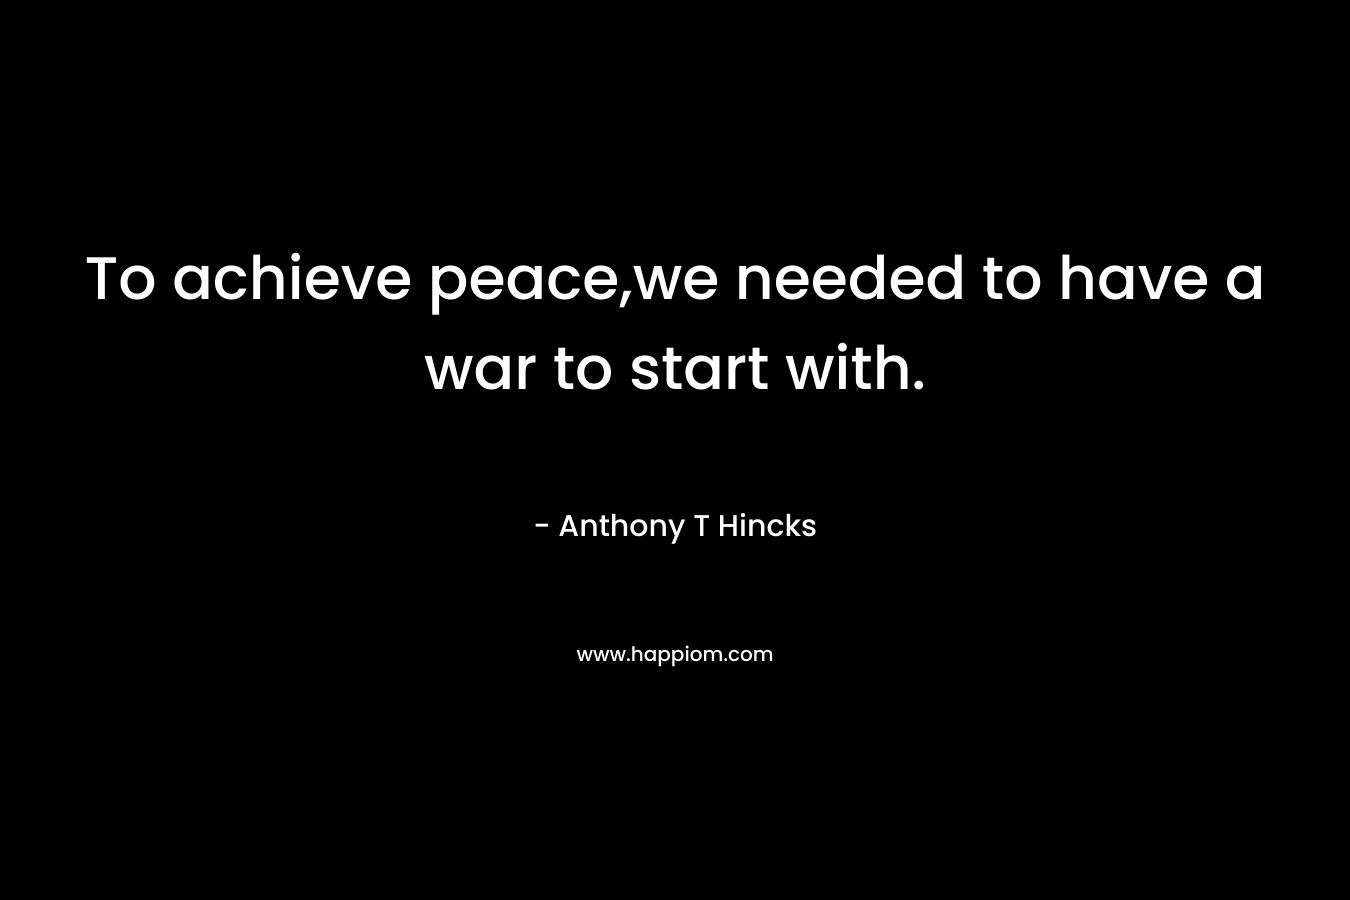 To achieve peace,we needed to have a war to start with.